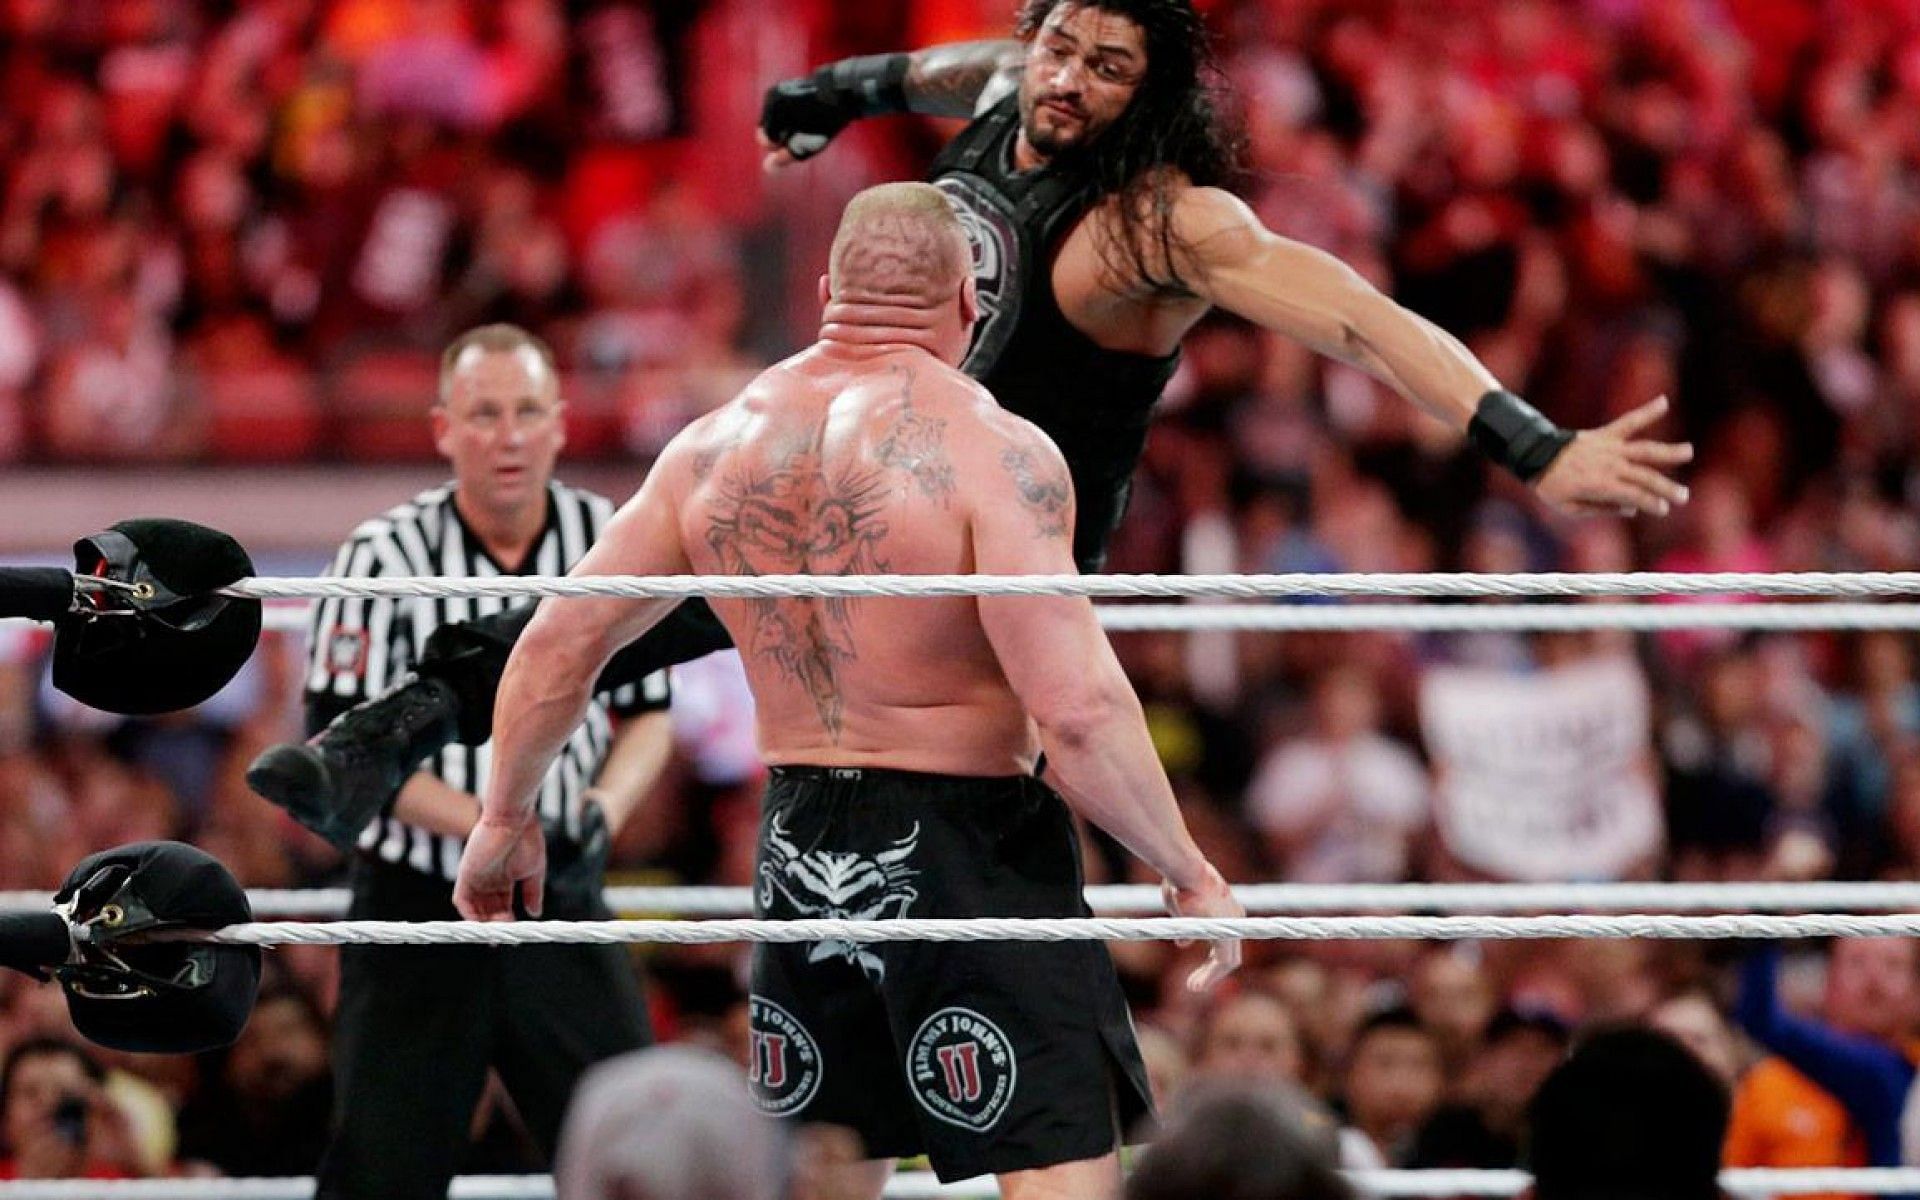 Roman Reigns and Brock Lesnar have gone to war in the past.